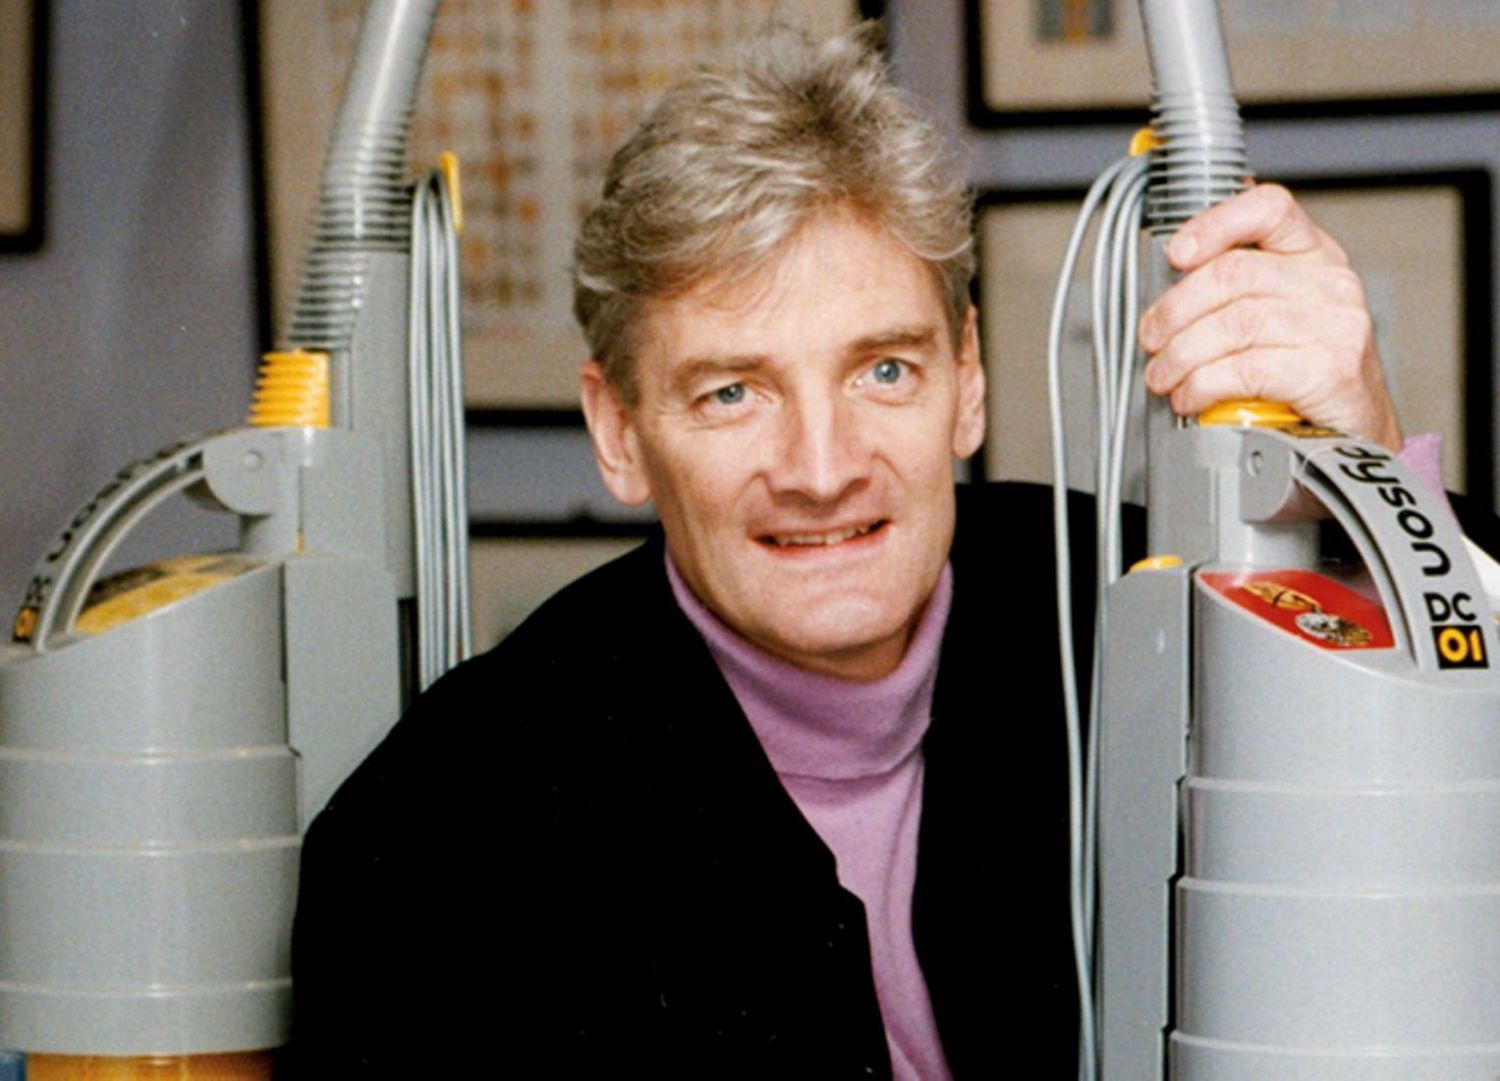 James Dyson with the DC01